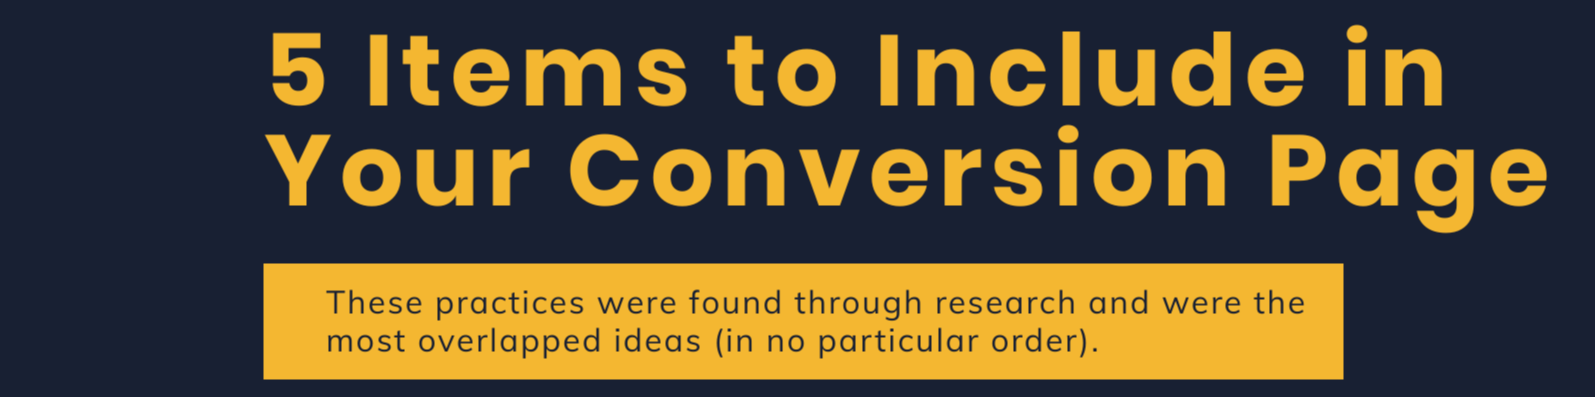 Conversion Page Infographic-1-1-1